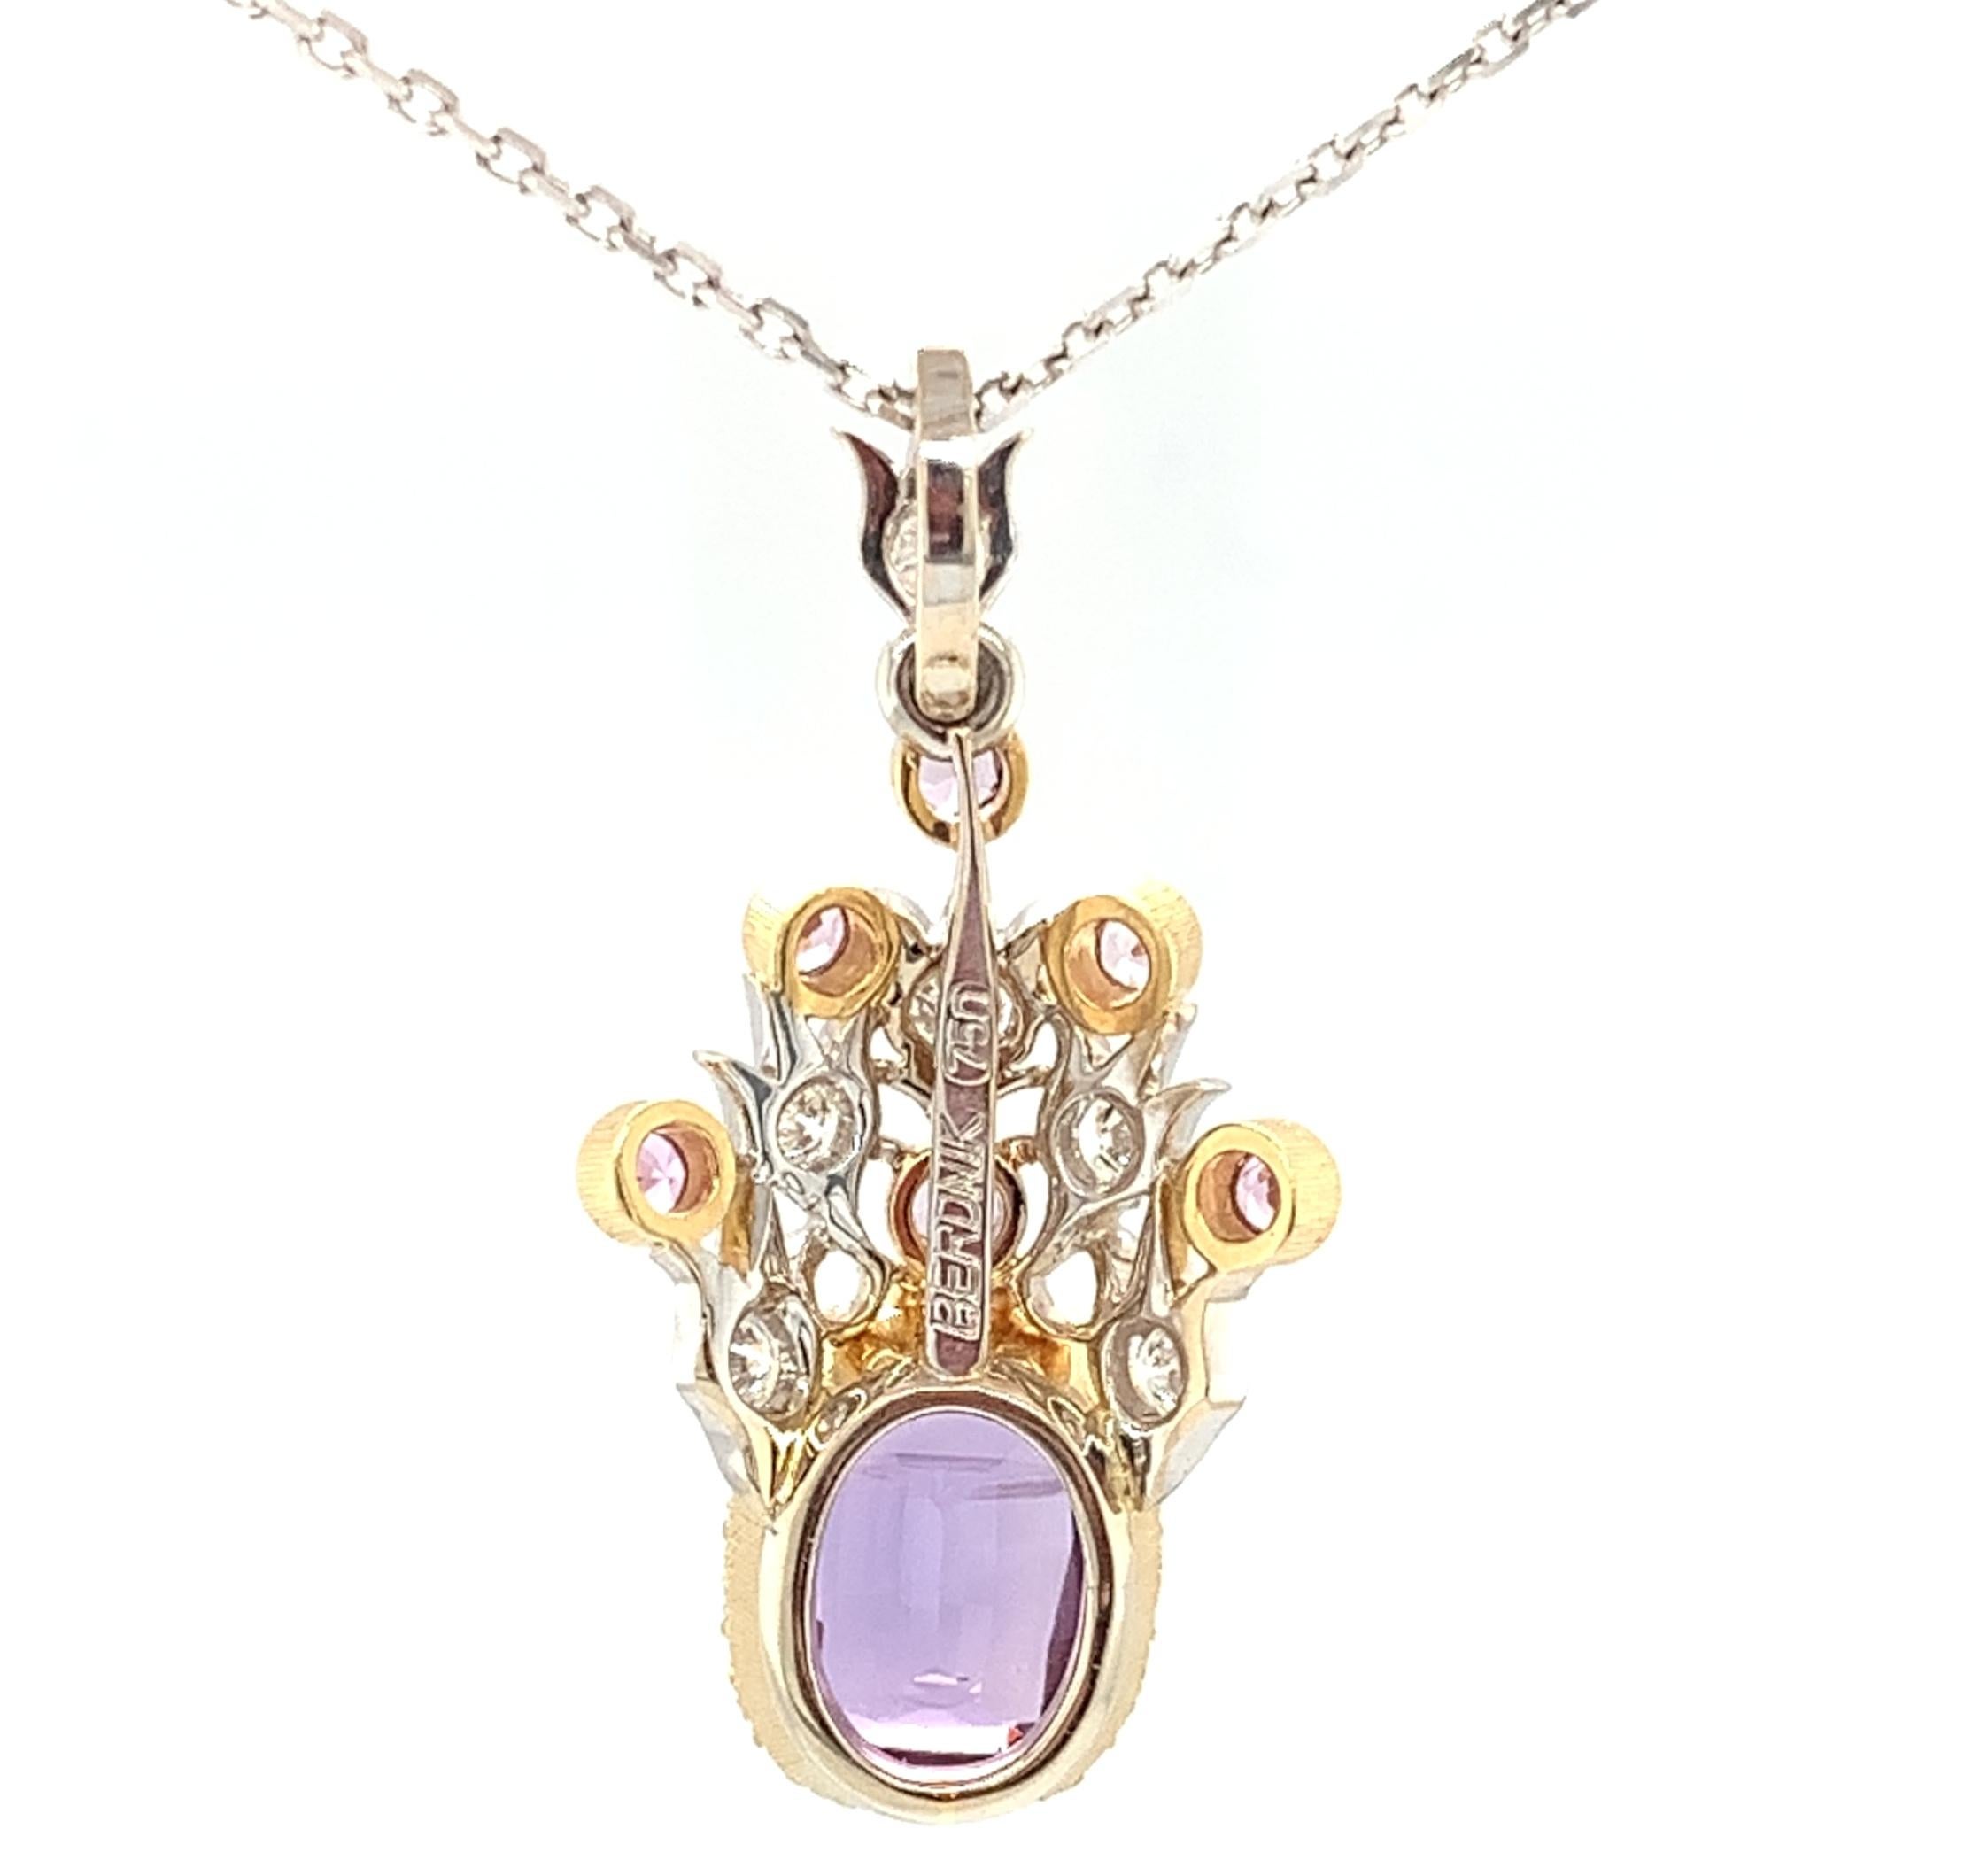 Women's 3.63 Carat Lavender Sapphire and Diamond Necklace in 18k White and Yellow Gold  For Sale